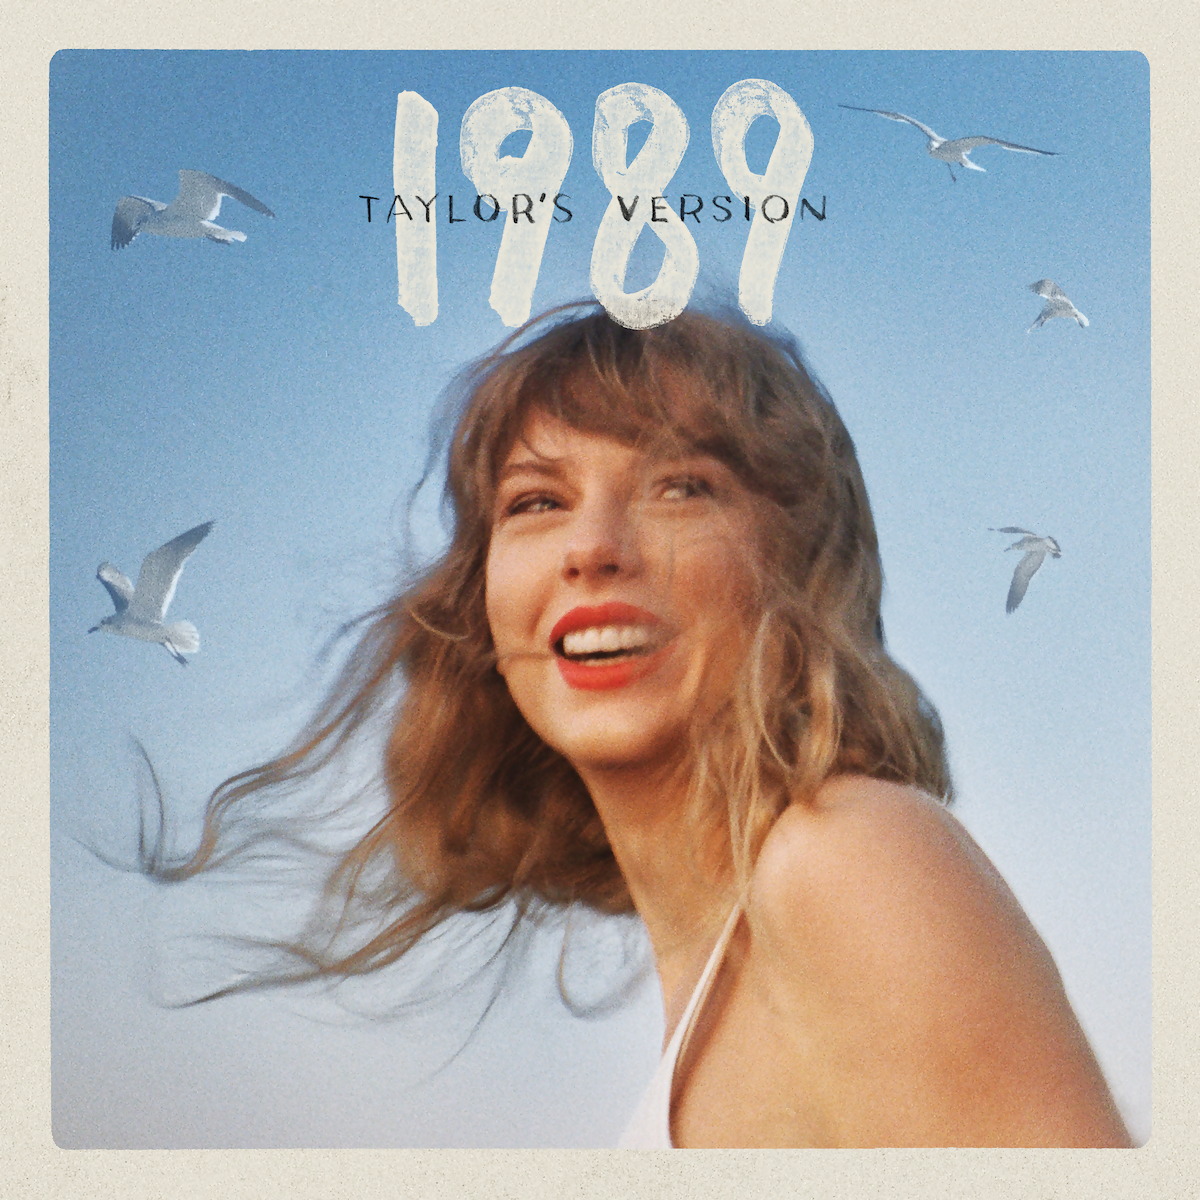 1989 (taylor's version) review